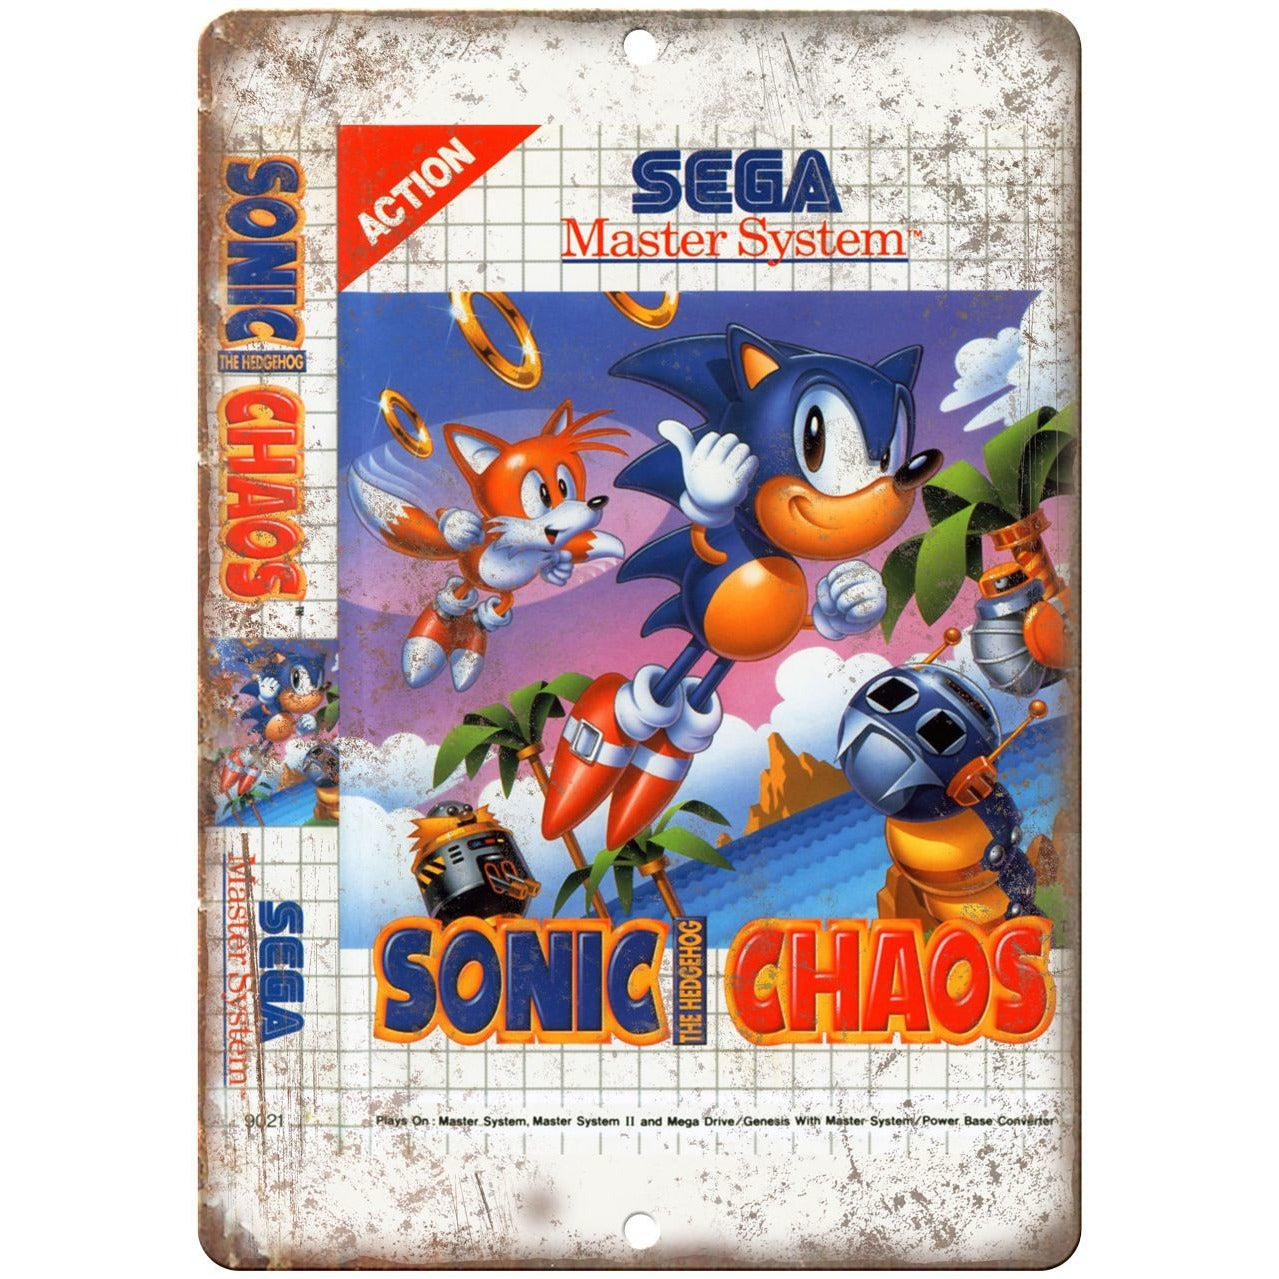 SONIC – THE HEDGEHOG (1991, Master System)